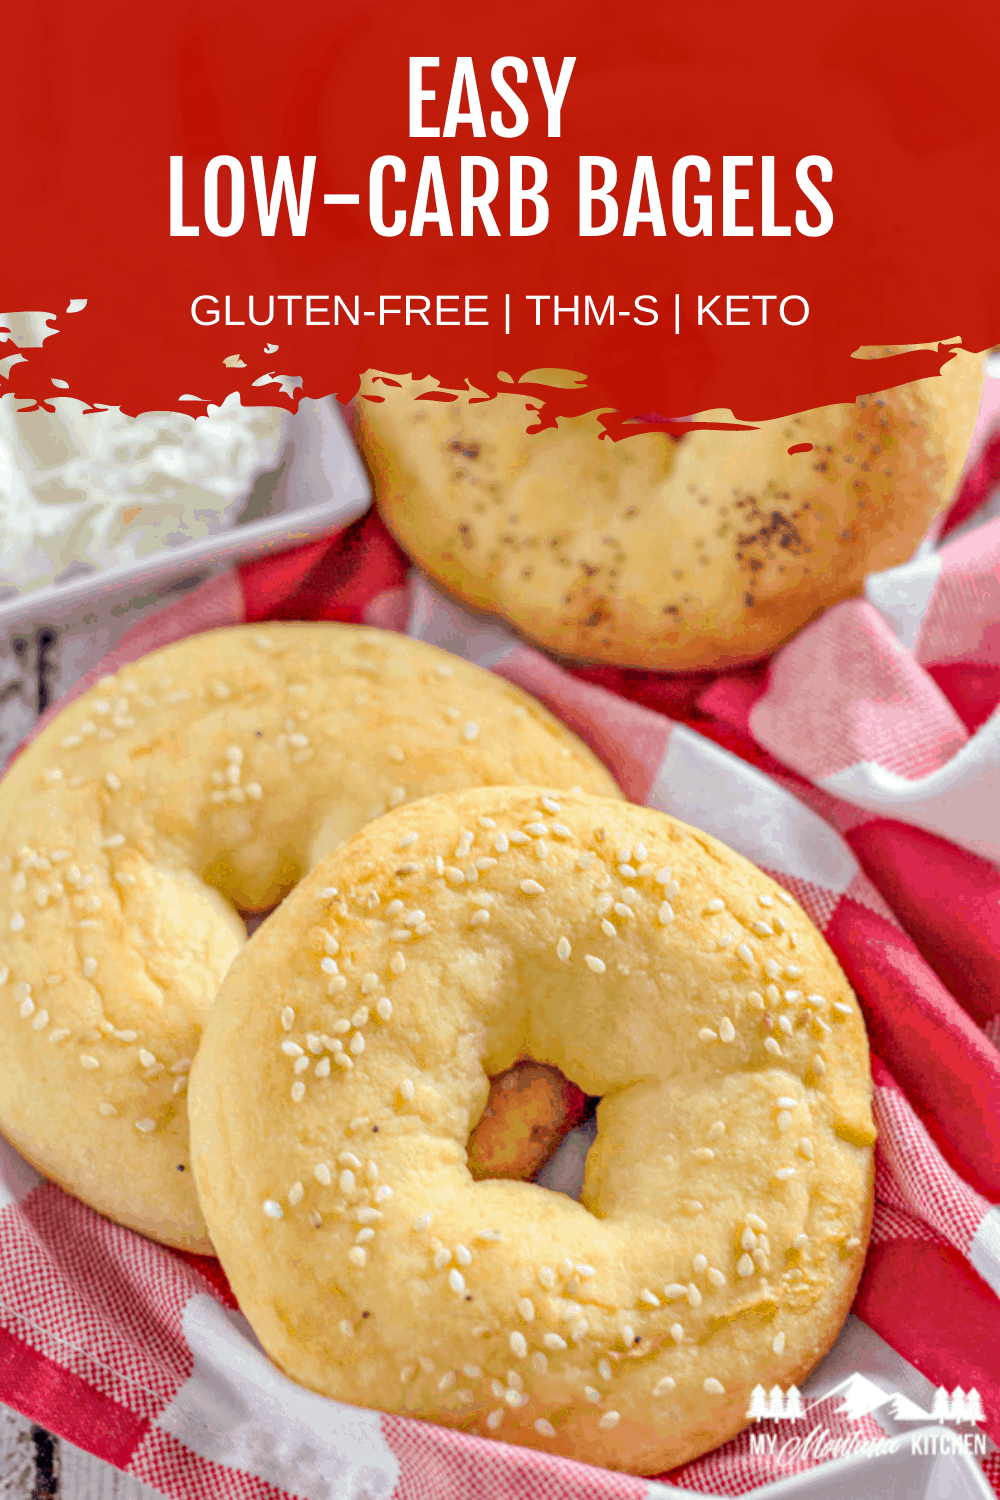 5 ingredients is all you need to make a homemade keto bagel. Top your bagels with whatever you want. A low carb bagel that is also gluten free and so simple to make.